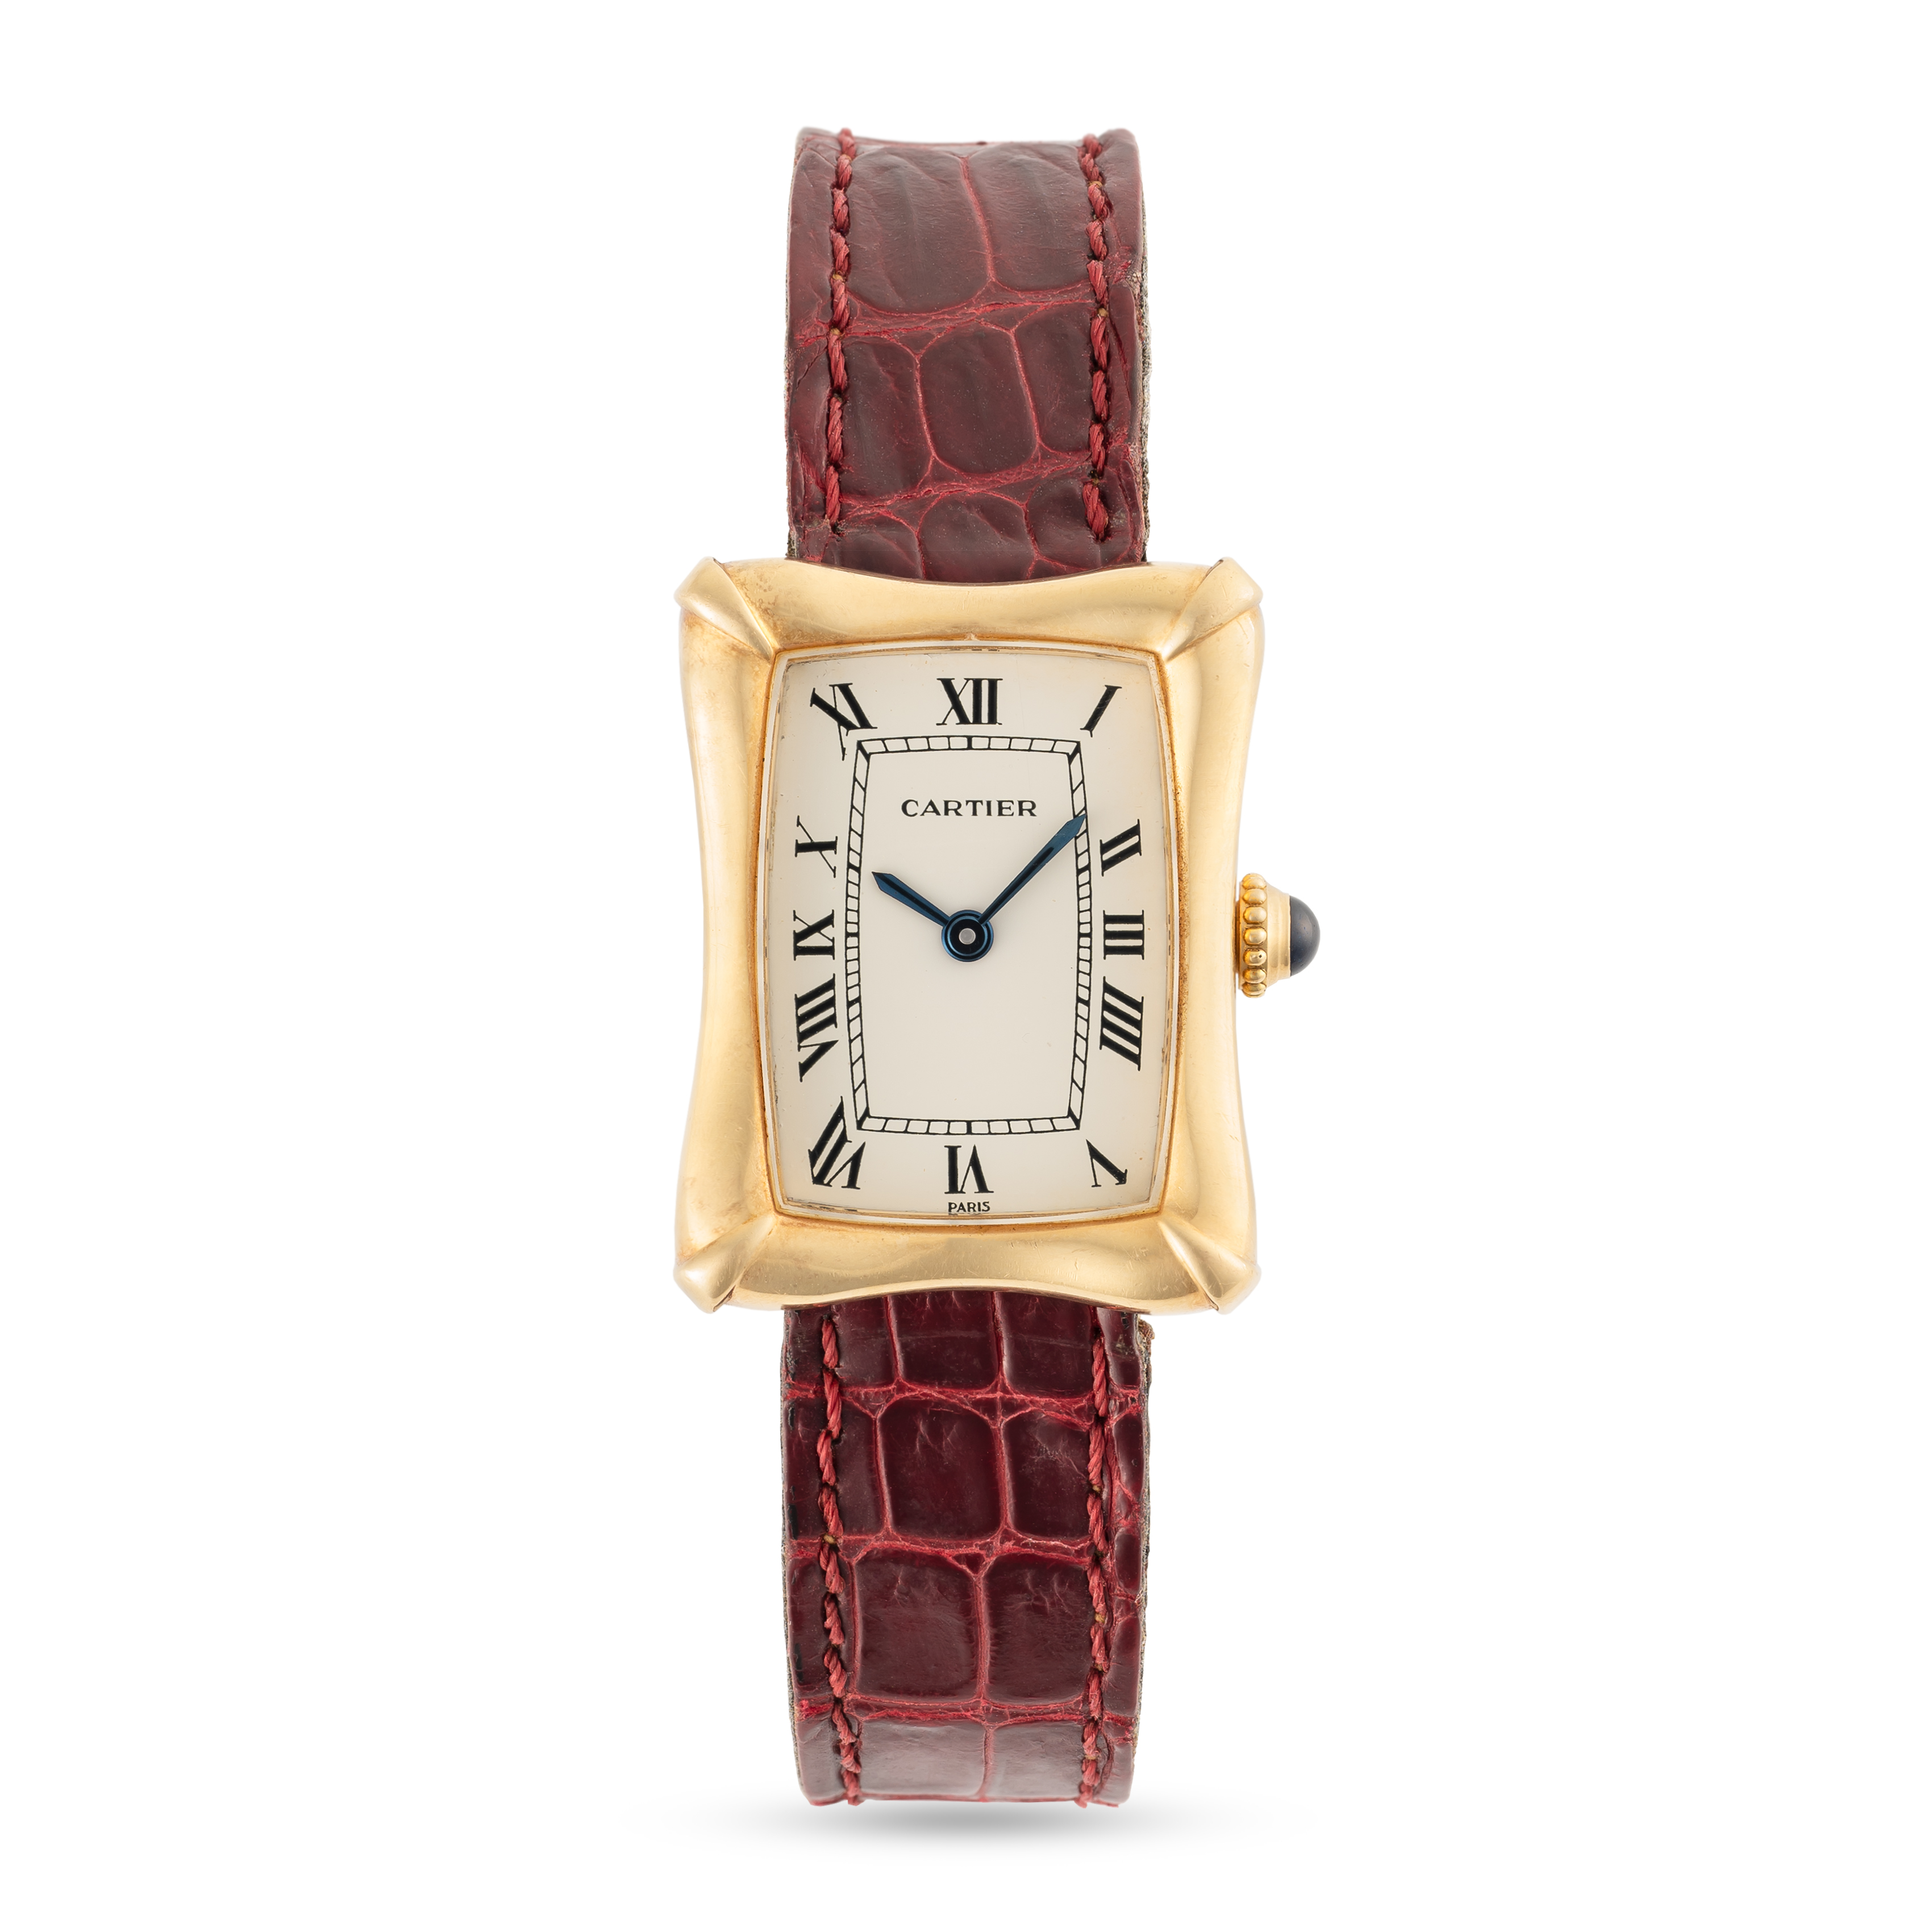 A VERY RARE LADY'S 18K SOLID GOLD CARTIER PARIS BAMBOO COUSSIN WRIST WATCH CIRCA 1970s, REF. 78110 - Image 2 of 10